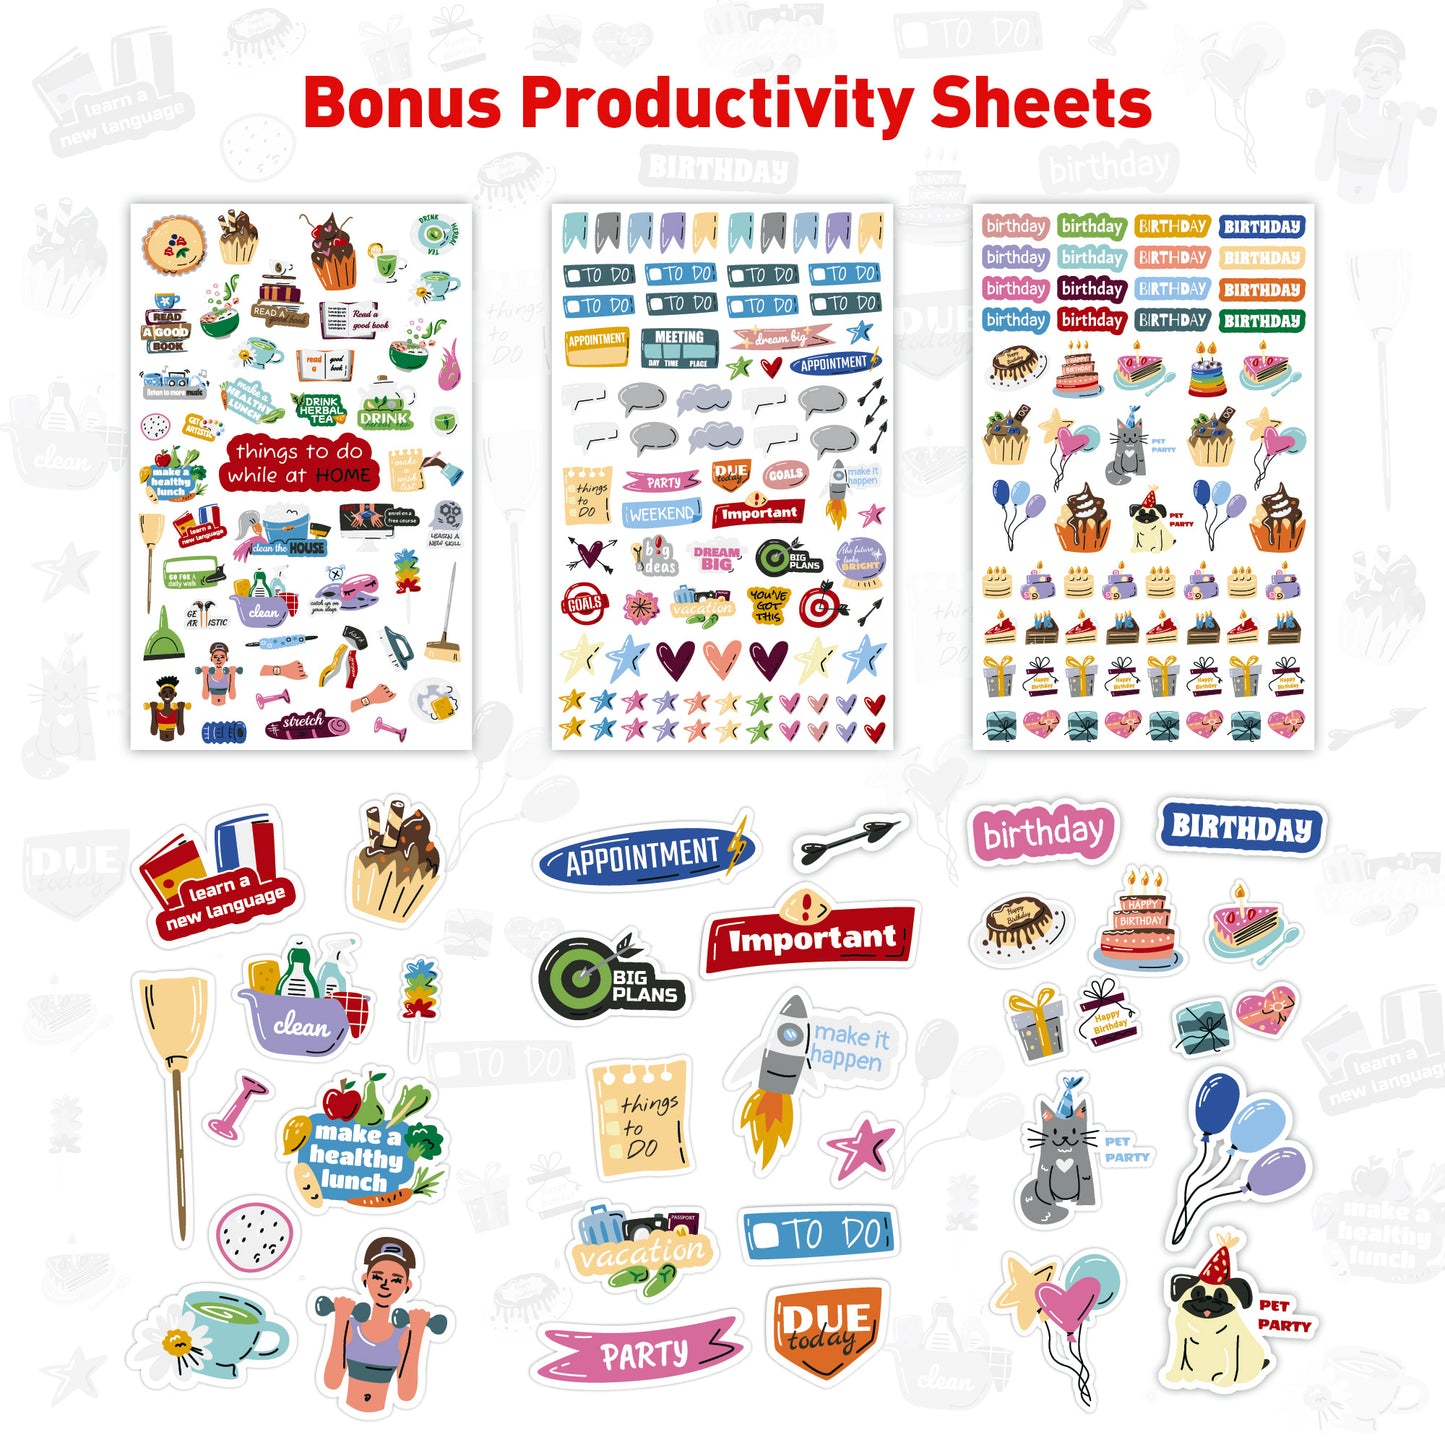 Aesthetic Stickers for Planners and Calendars - 1000+ Cute Calendar Stickers for Kids and Adults - Ideal for Fun and Creative Planning - The Perfect Planner Stickers and Accessories